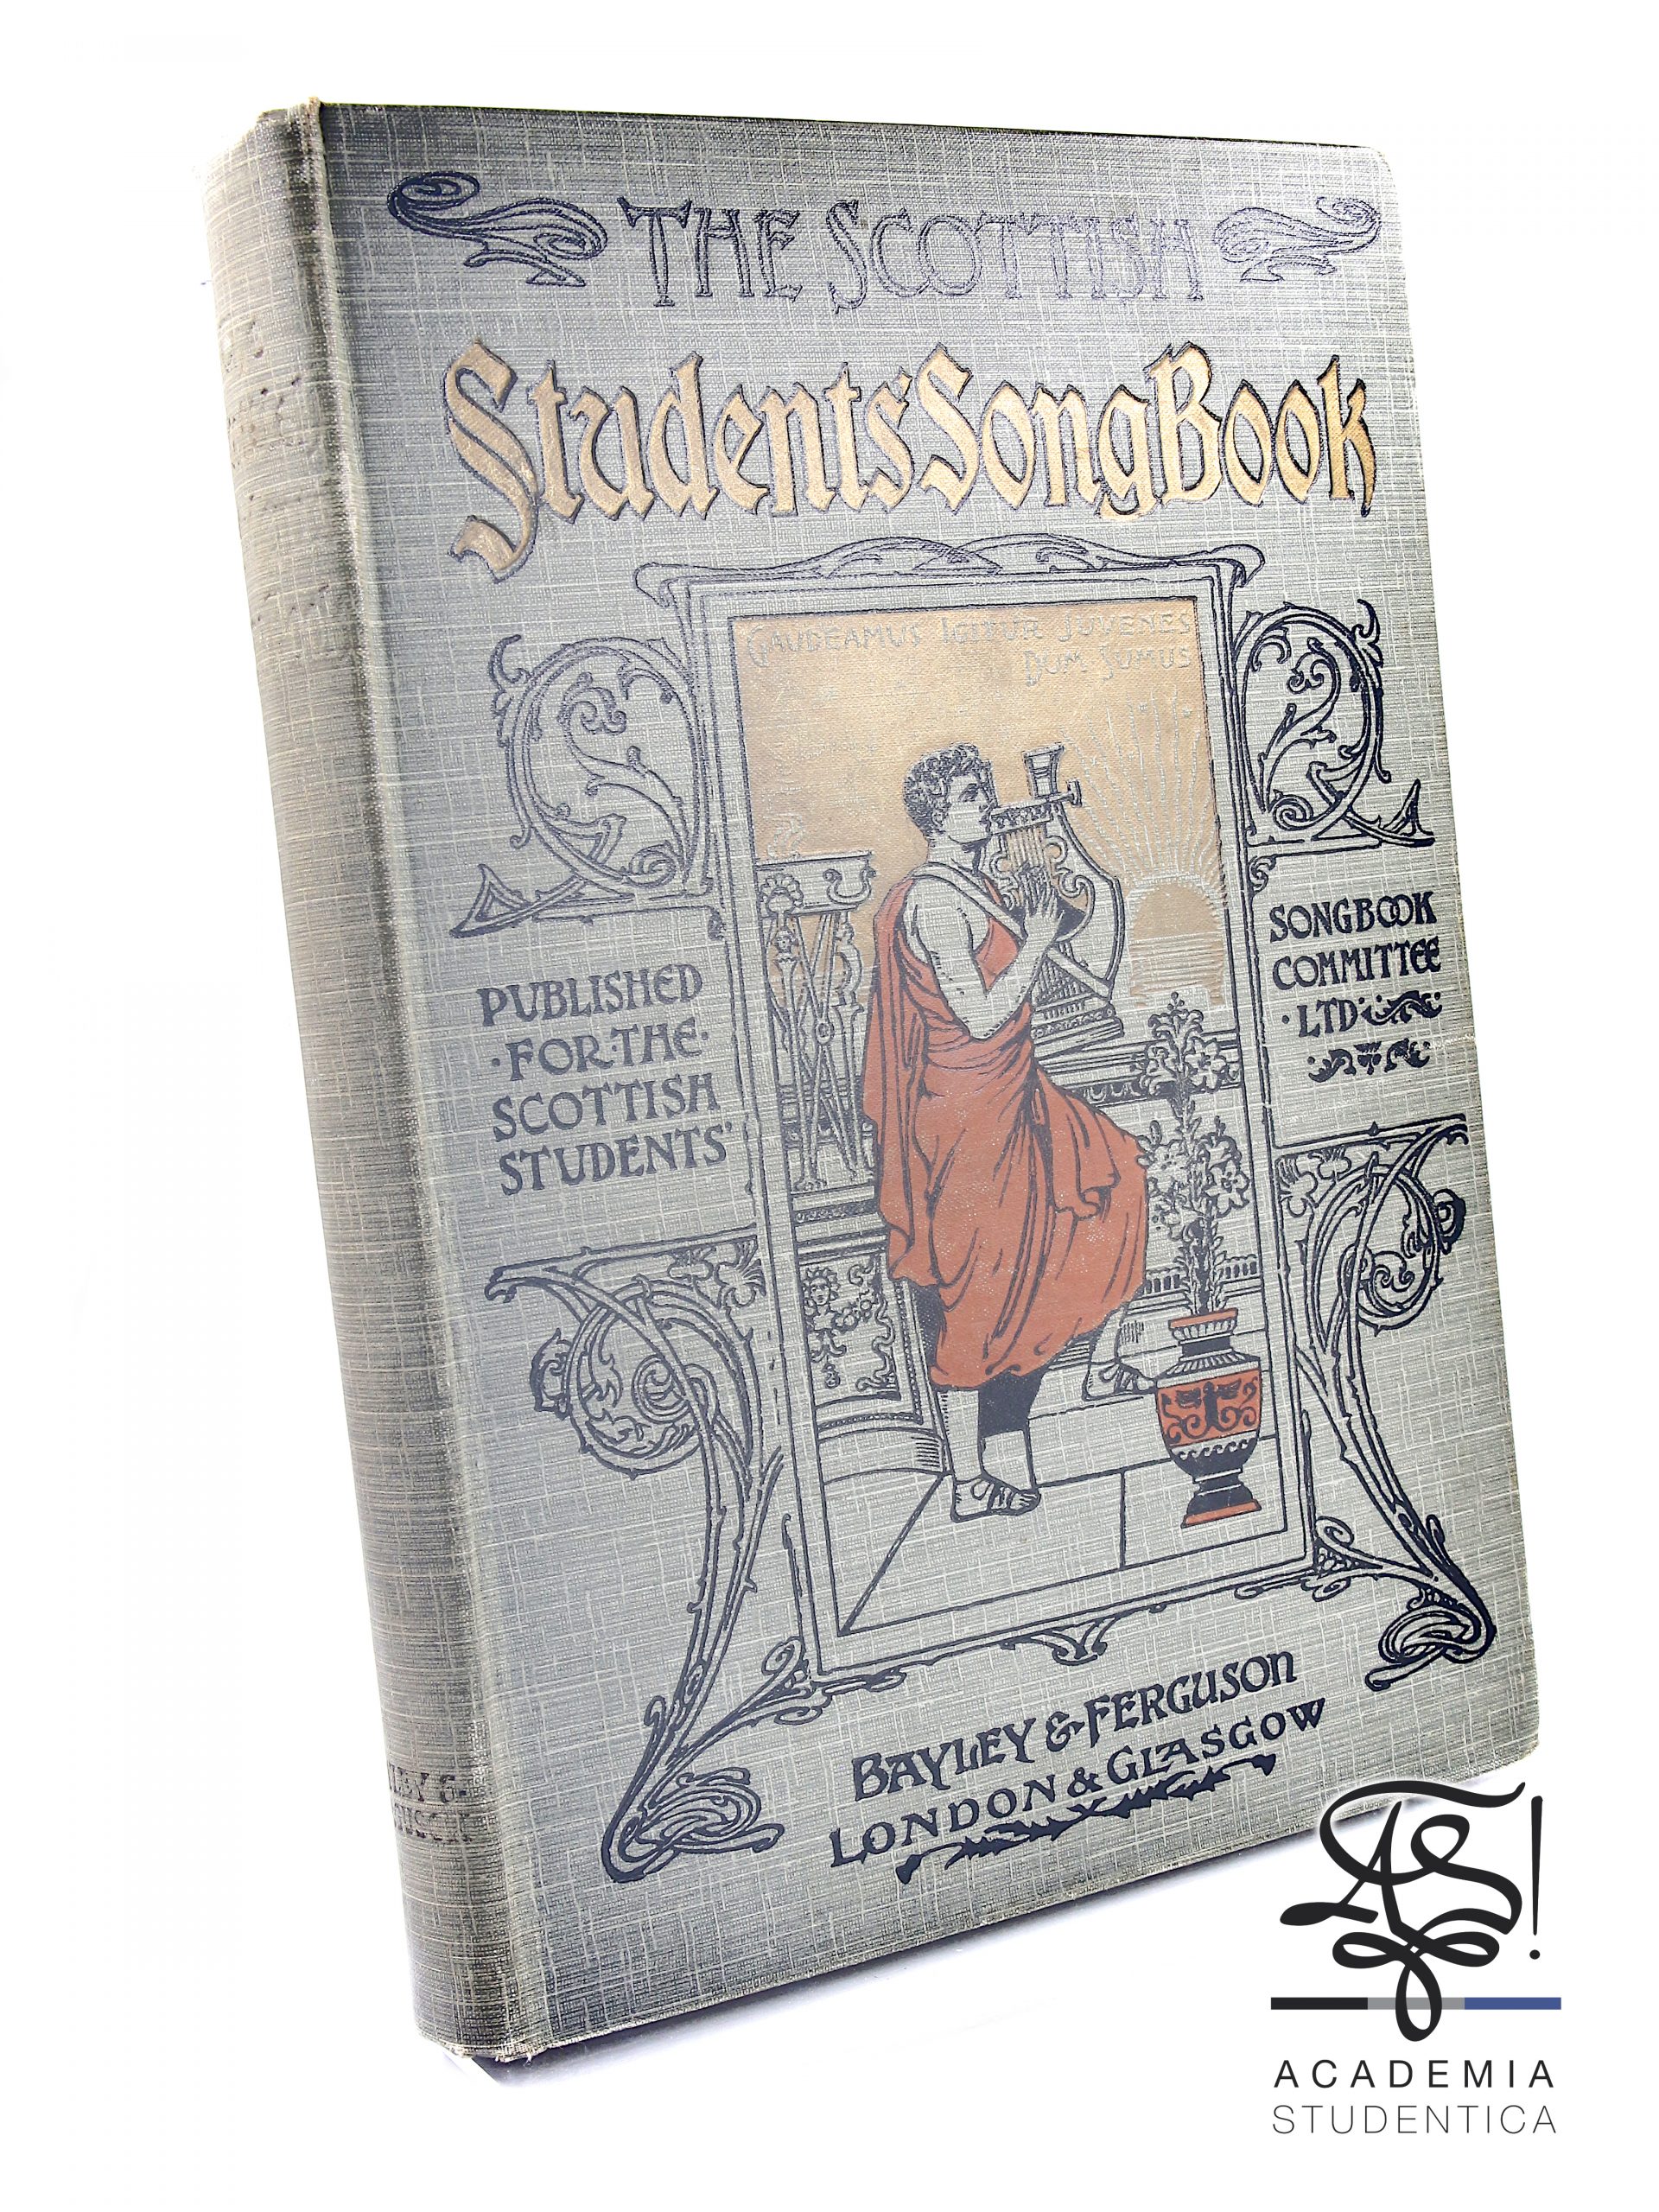 Read more about the article The Scottish Students Songbook Committee, The Scottish Students Songbook, Bayley & Ferguson, London & Glasgow, 1897.